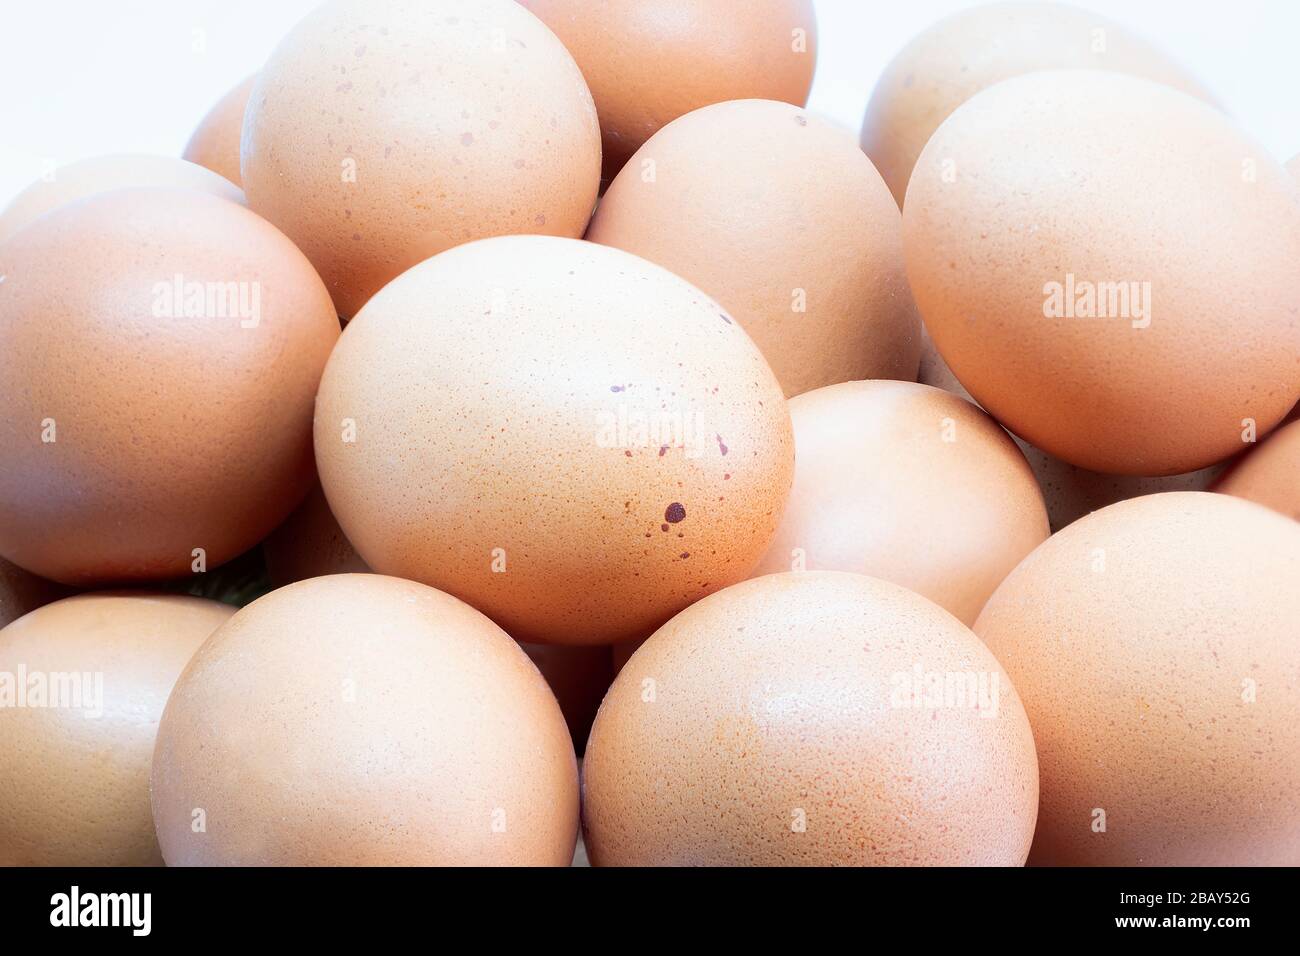 Organic farm eggs from ecologically clean areas Stock Photo